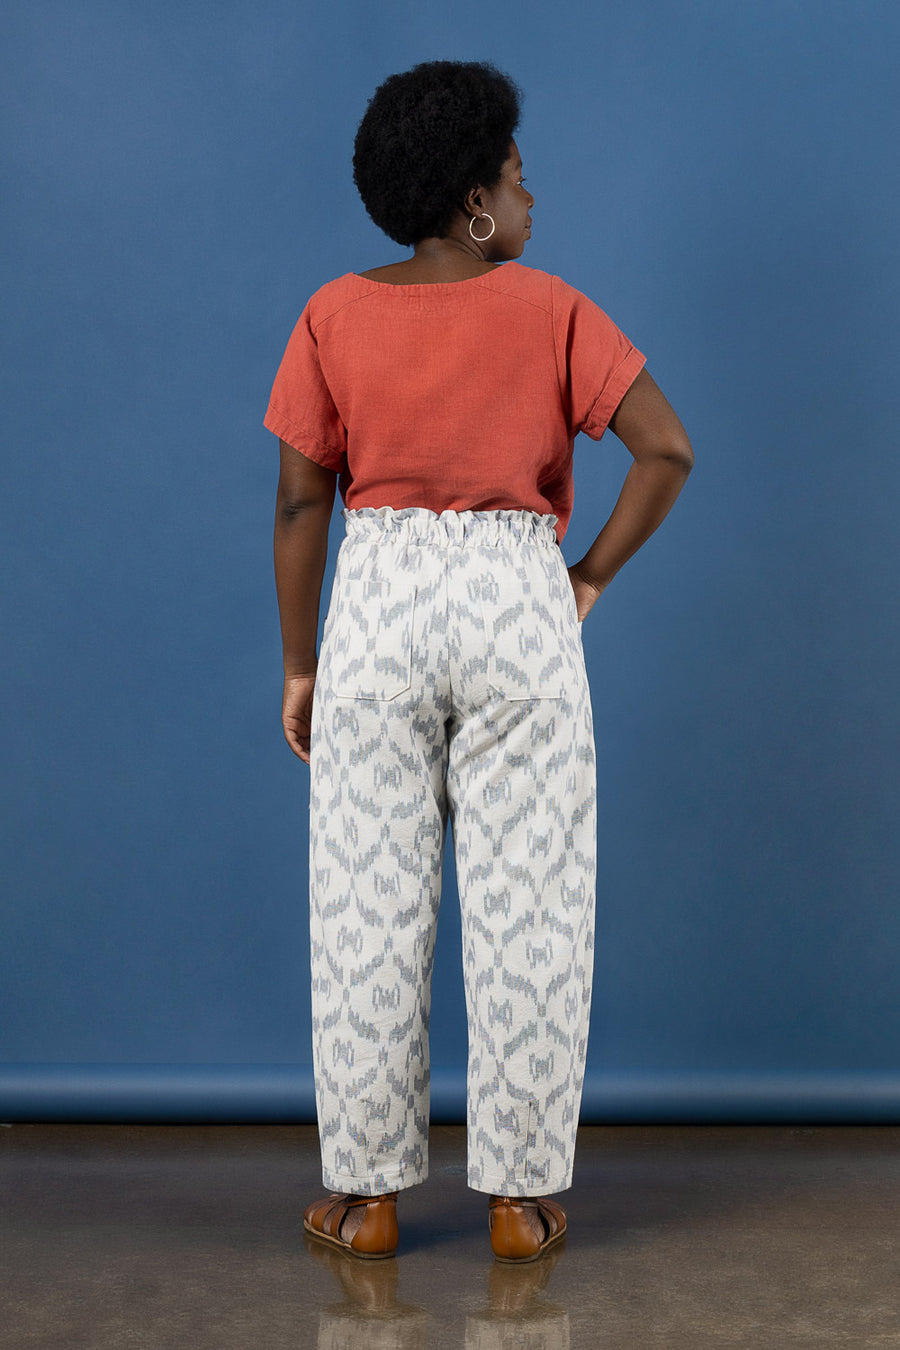 DIY Culottes! Pattern Hack + Stretch Waistband with Non-Stretch Fabric. -  YouTube